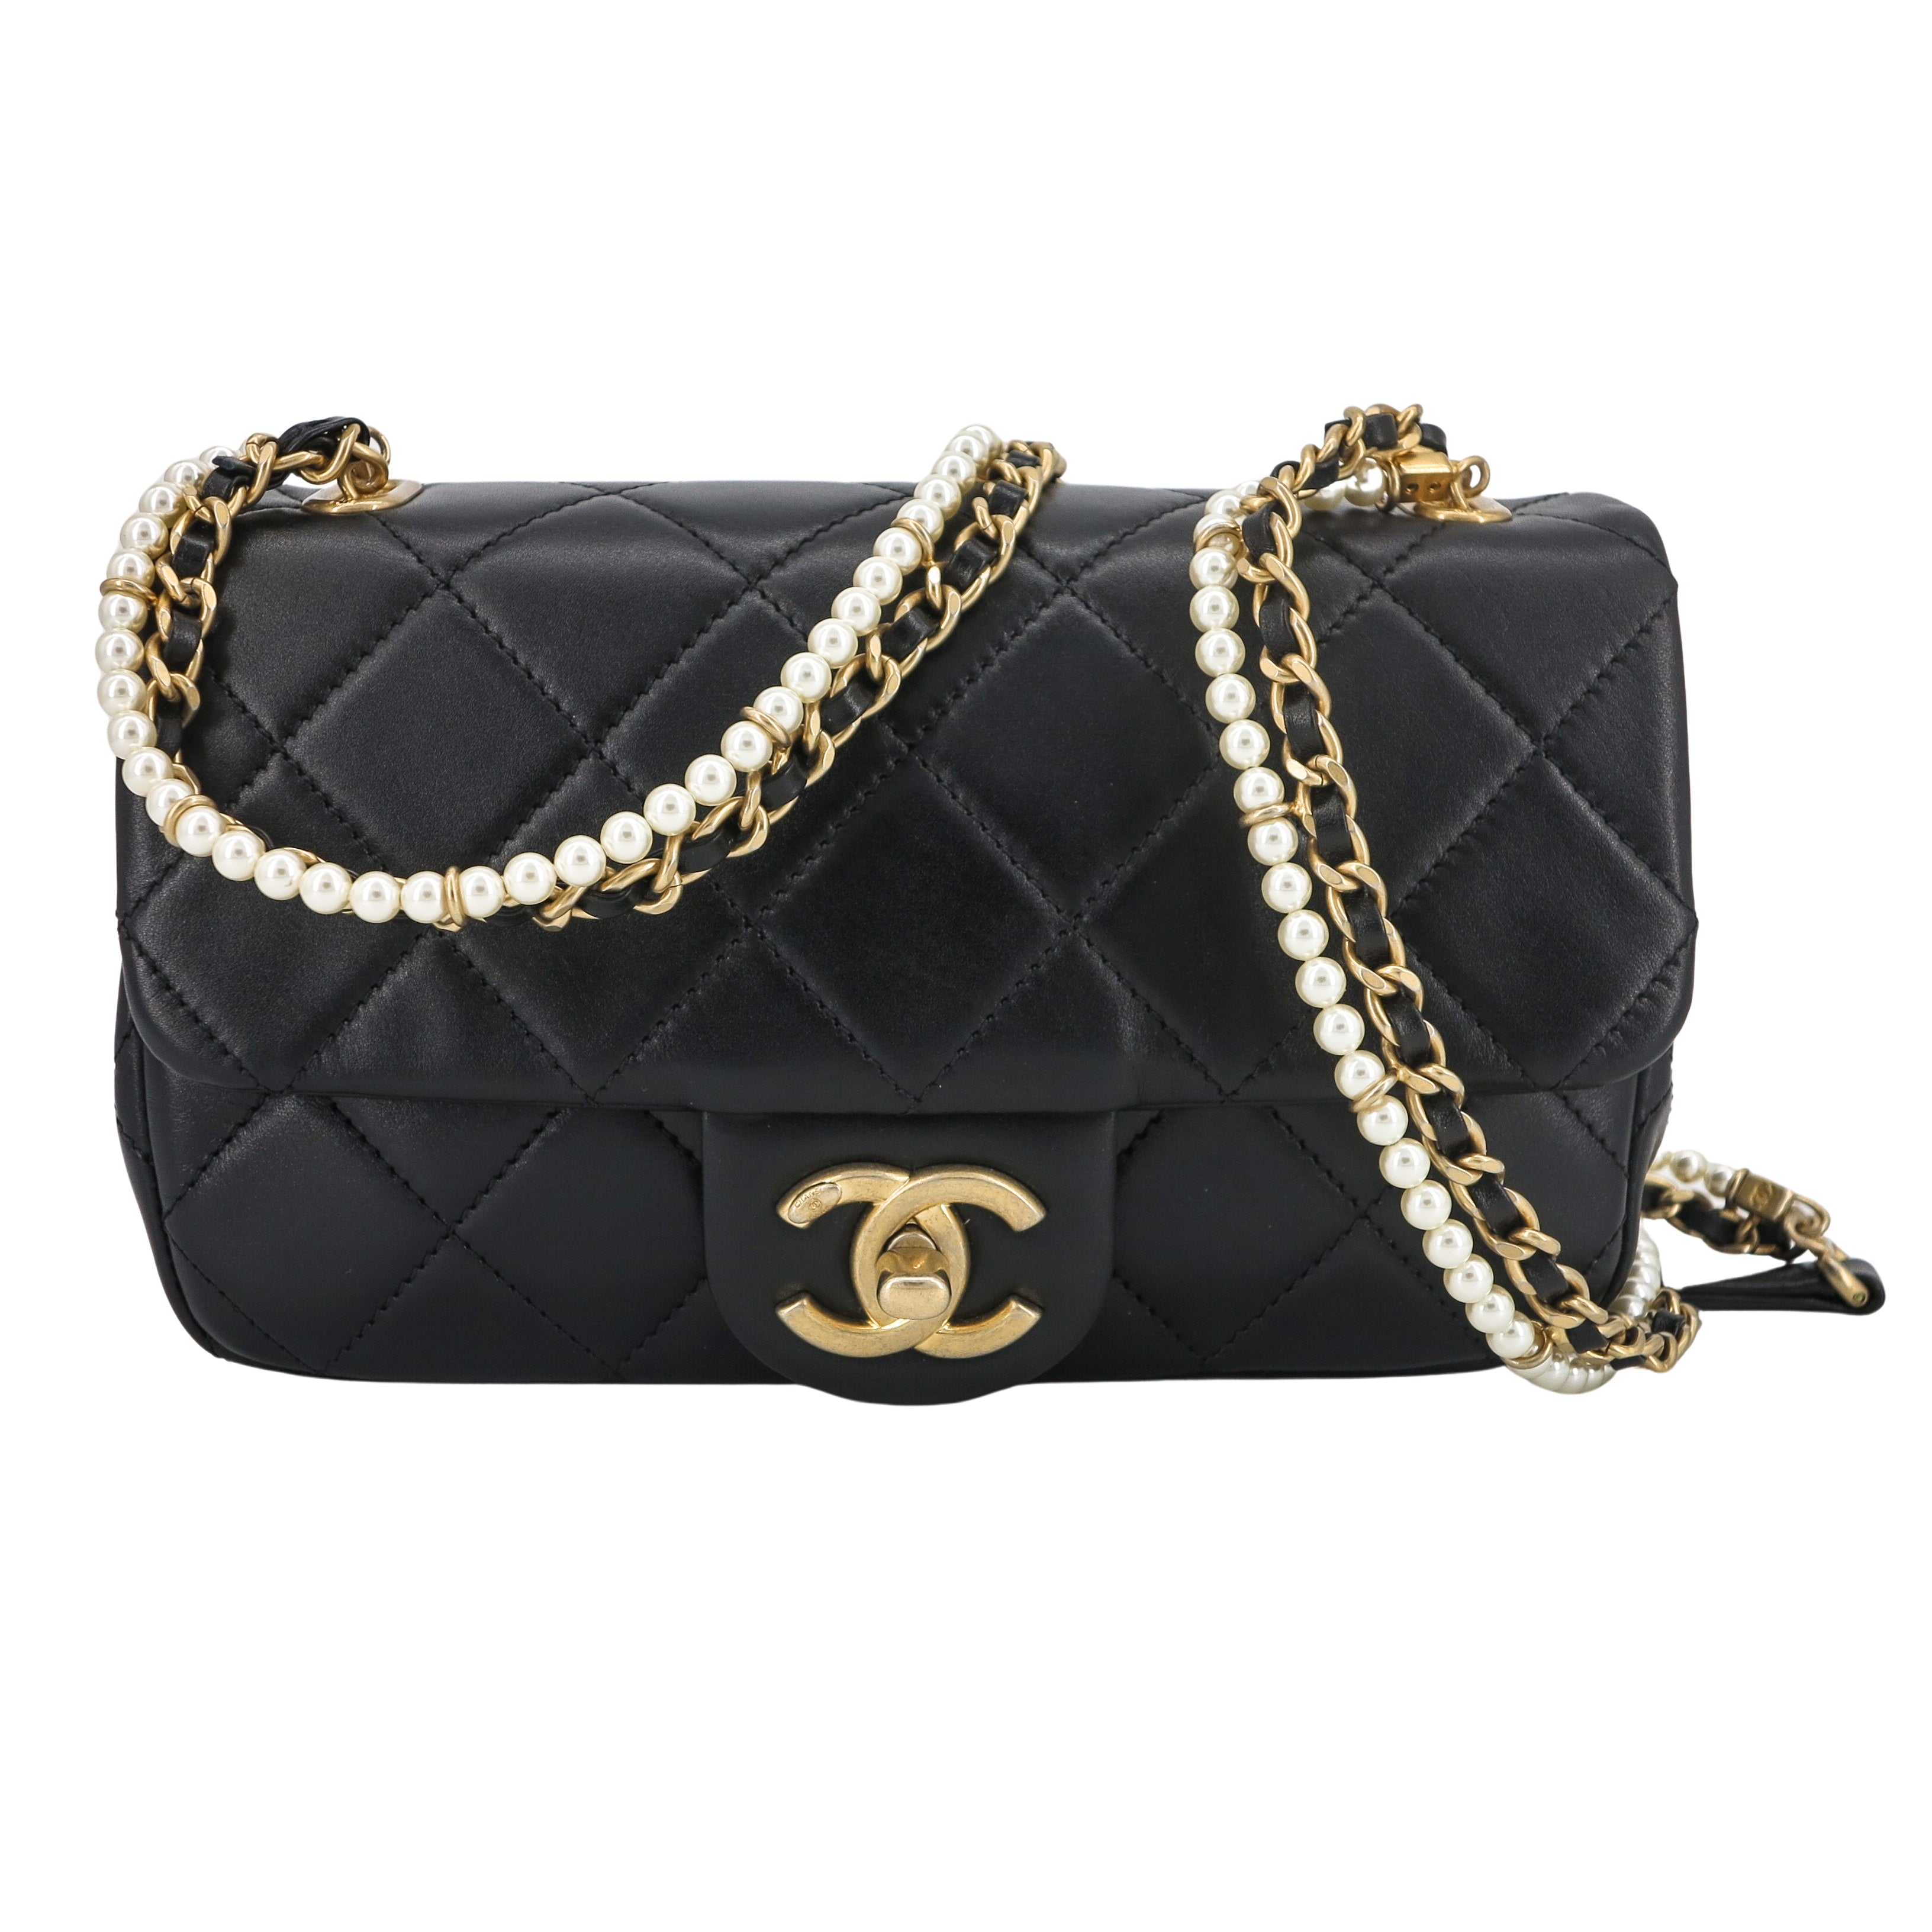 No.3481-Chanel Pearl Crush Mini Flap Bag 20cm – Gallery Luxe